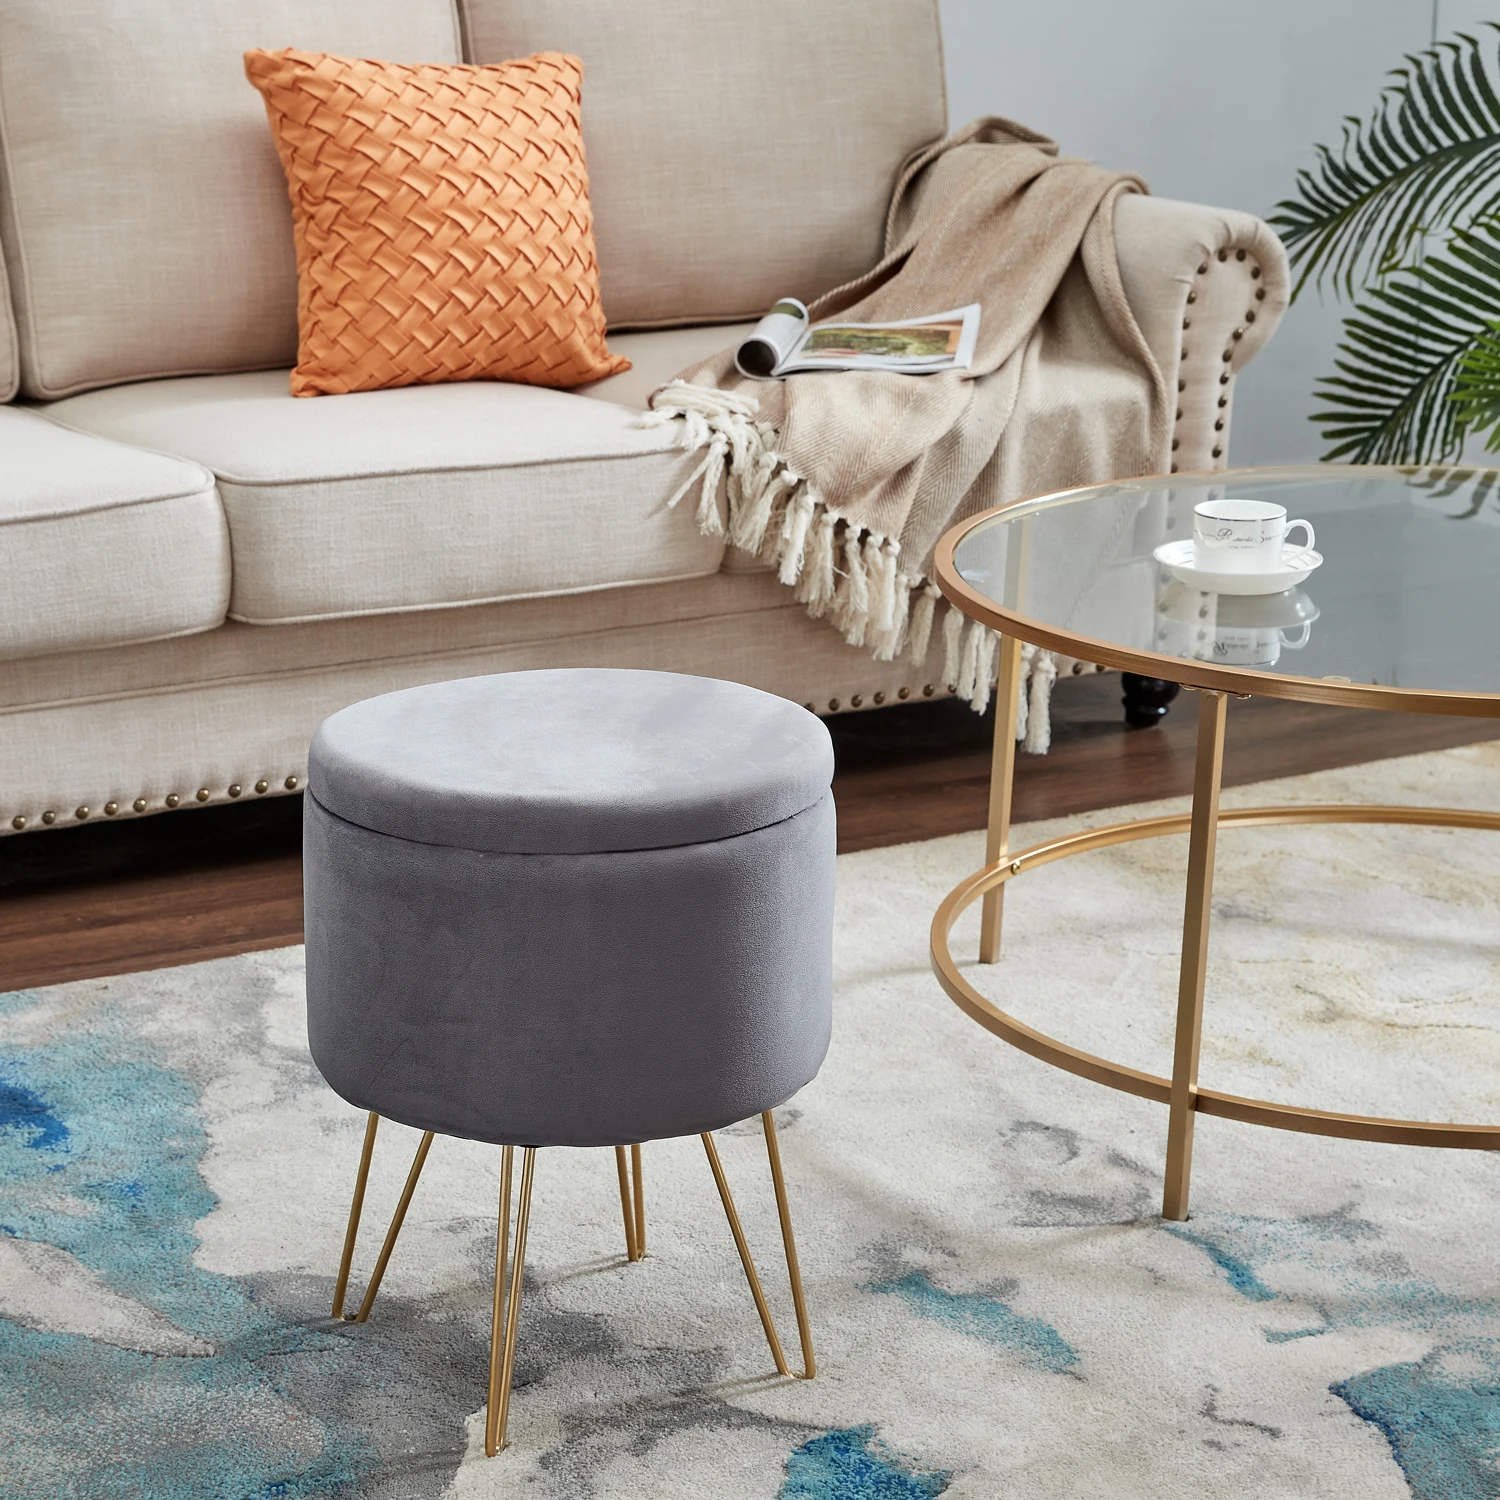 

【USA READY STOCK】Round Velvet Footrest Stool Ottoman, Upholstered Vanity Chair Pouffe with Storage Function Seat/Tray Table